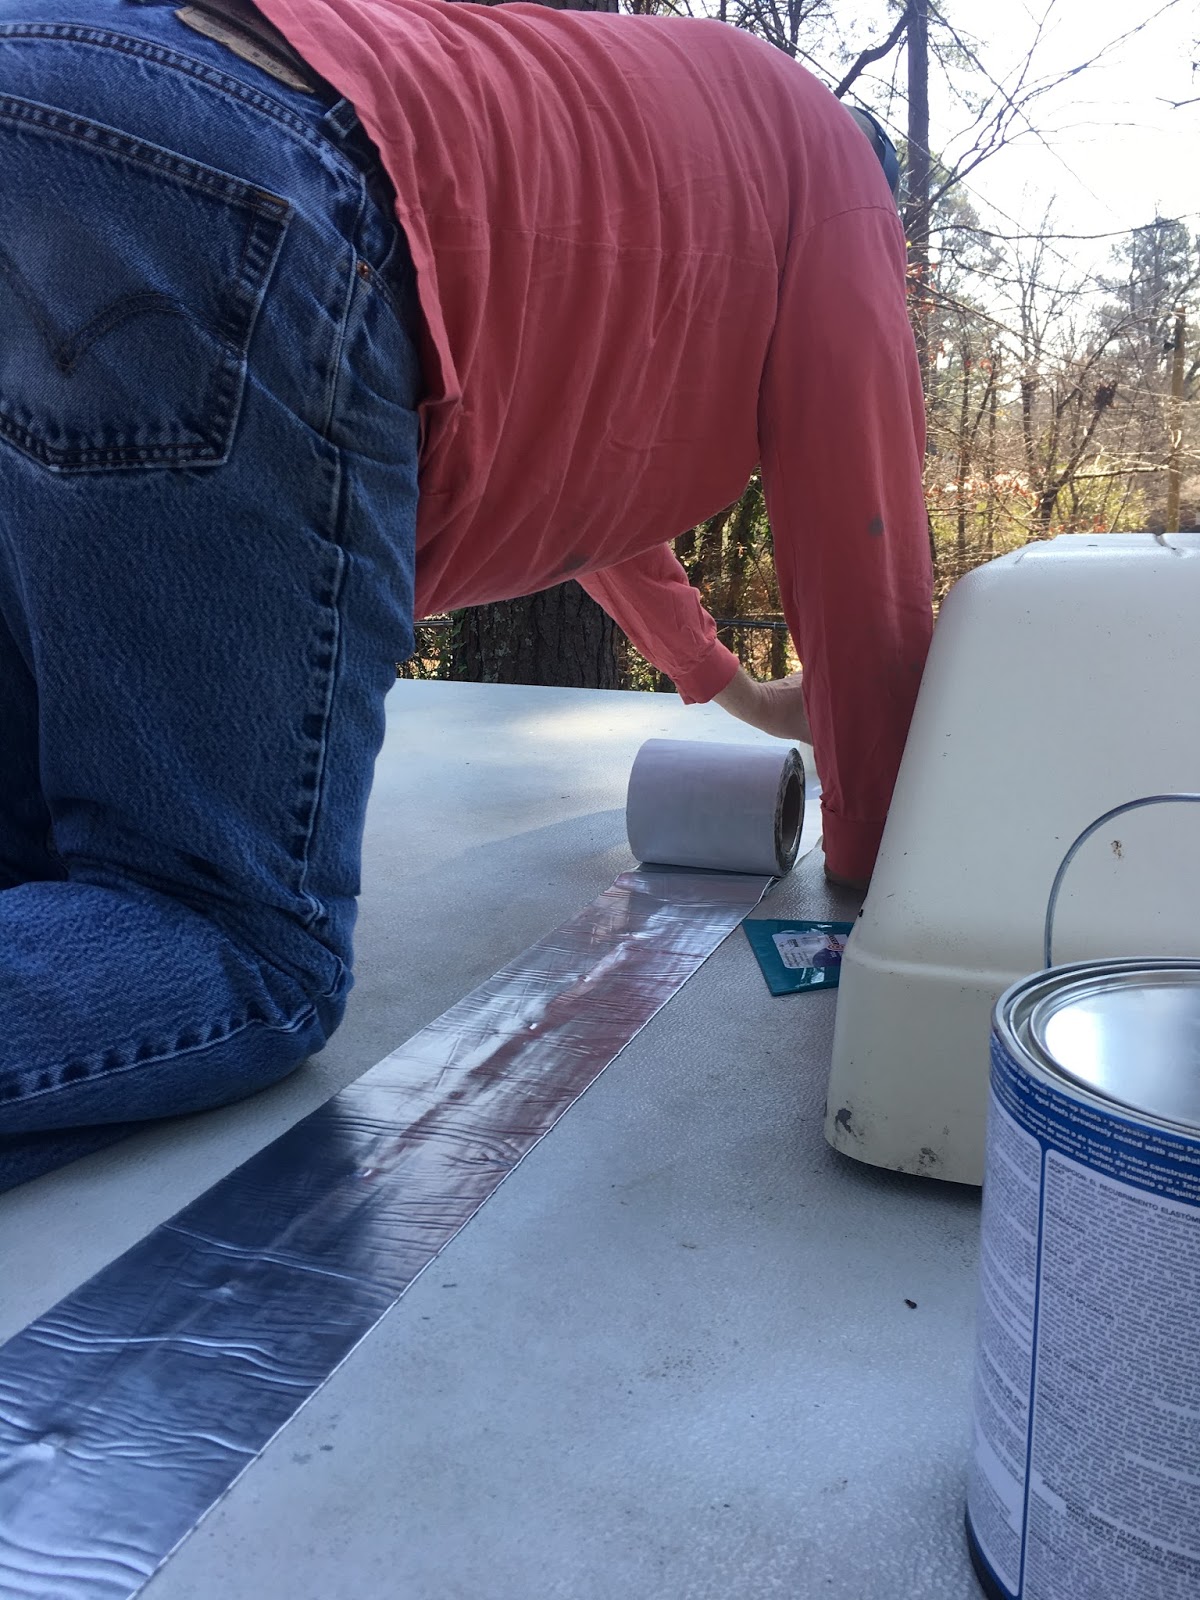 The Southern Glamper: Fixing Pop Up Camper Leaks - How to Do It Yourself How To Seal A Pop Up Camper Roof